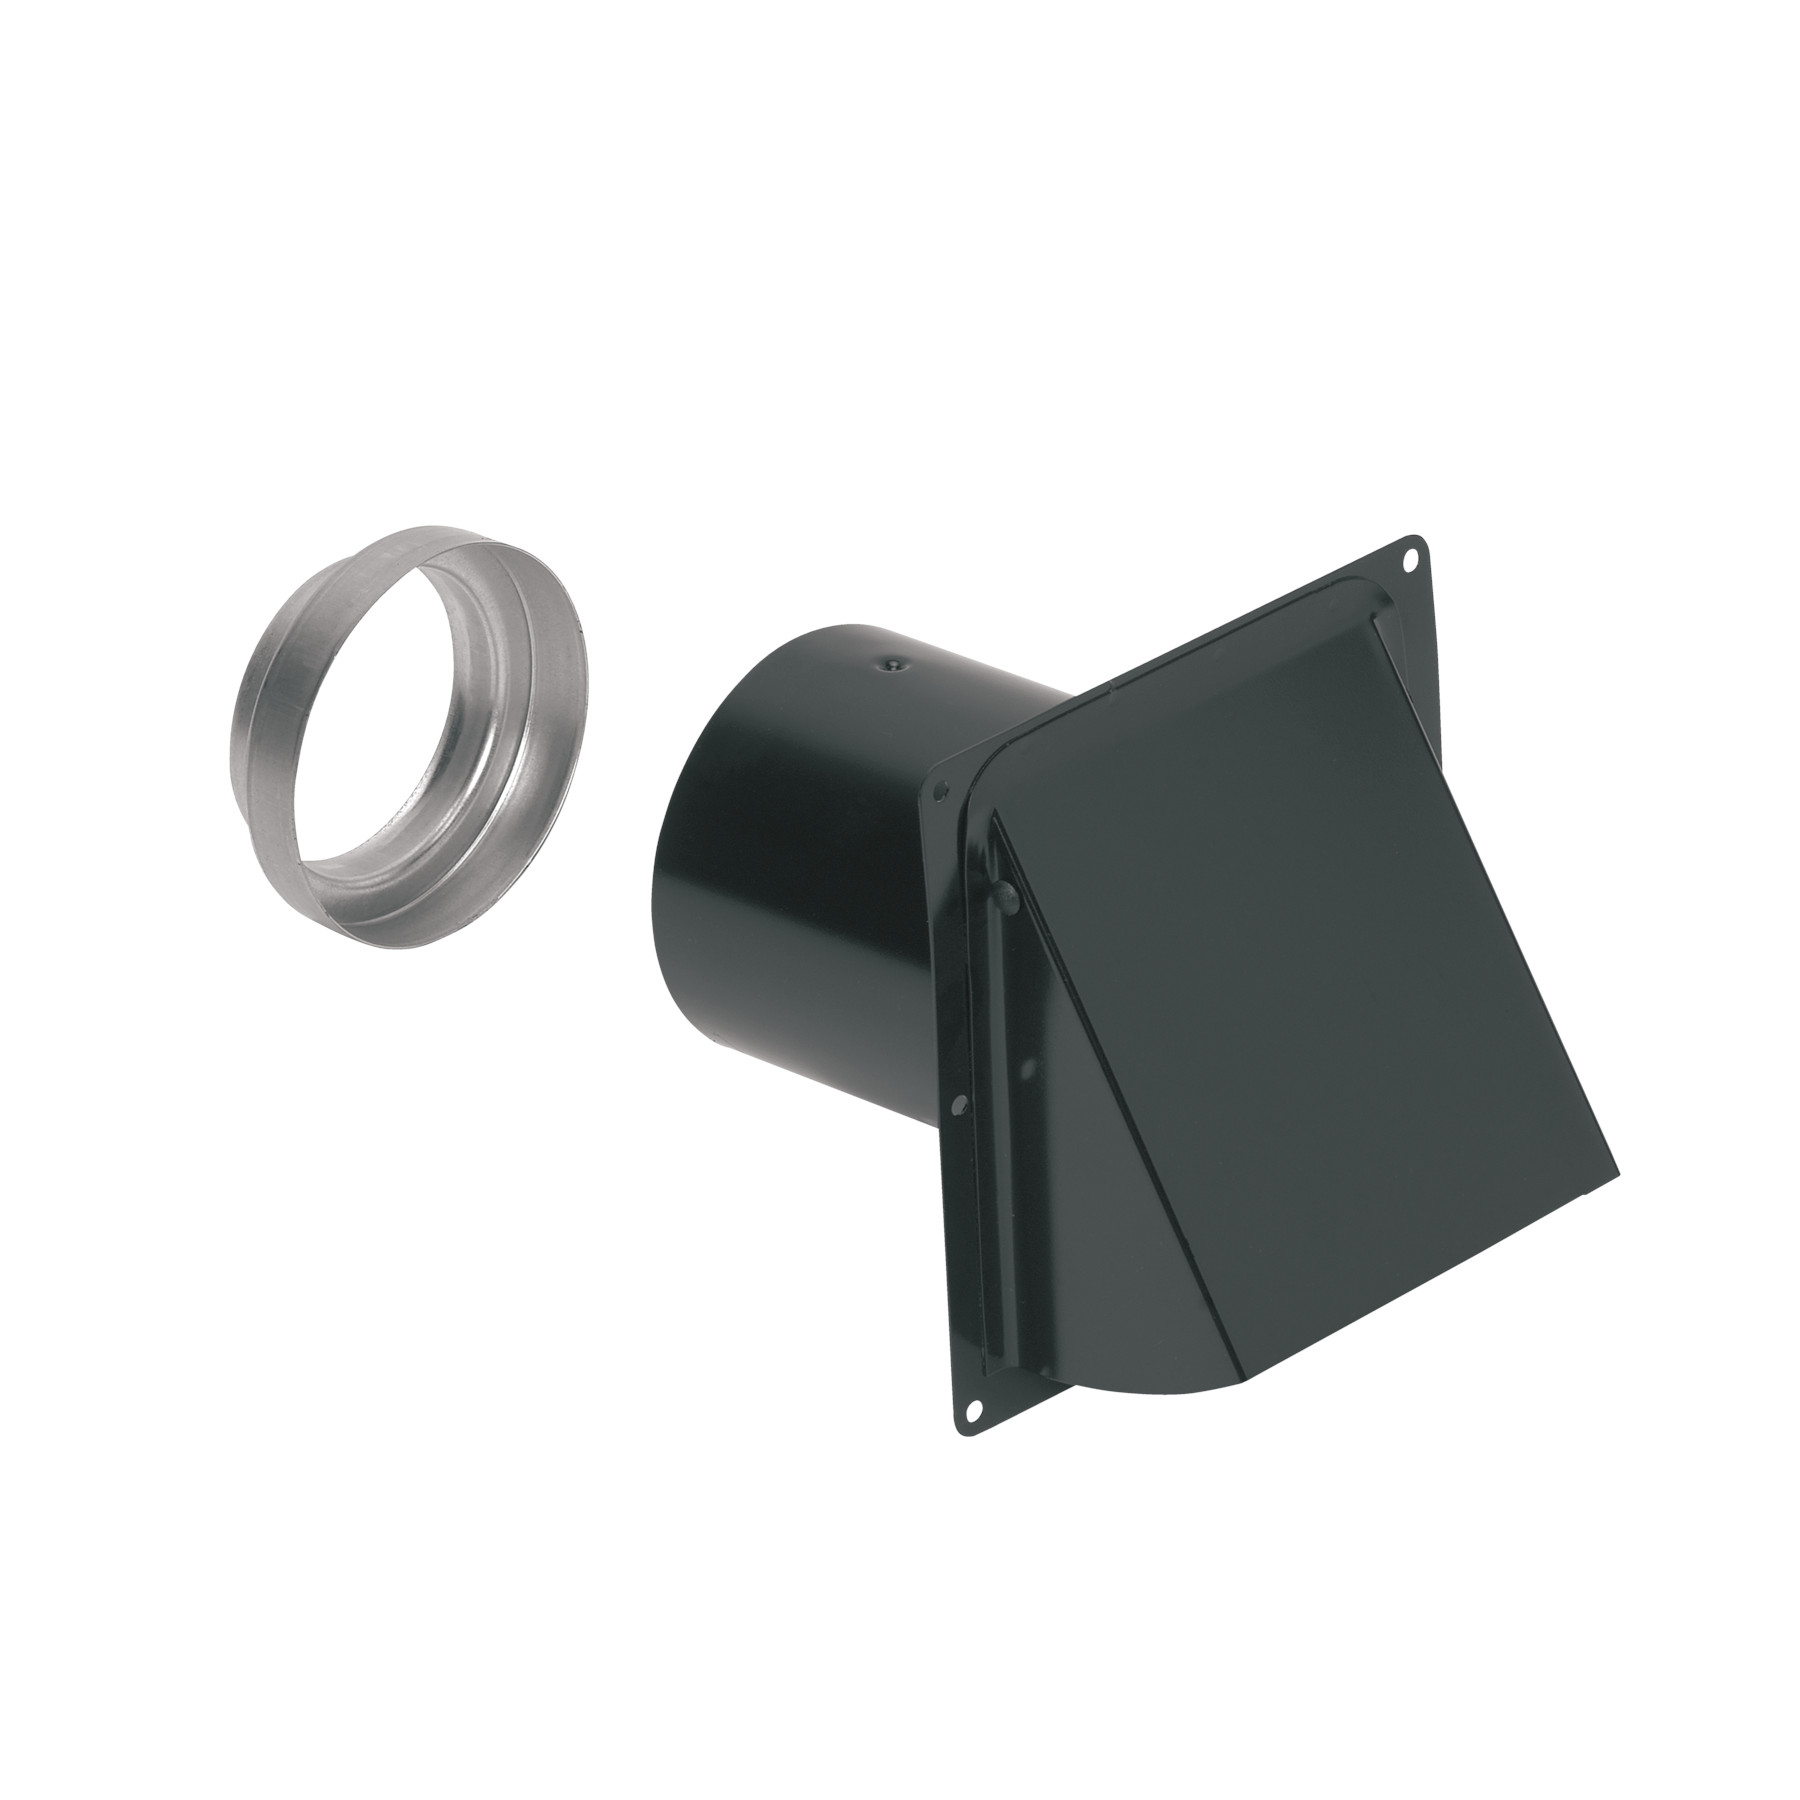 Broan-NuTone® Wall Cap, Steel, Black, for 3" and 4" round duct